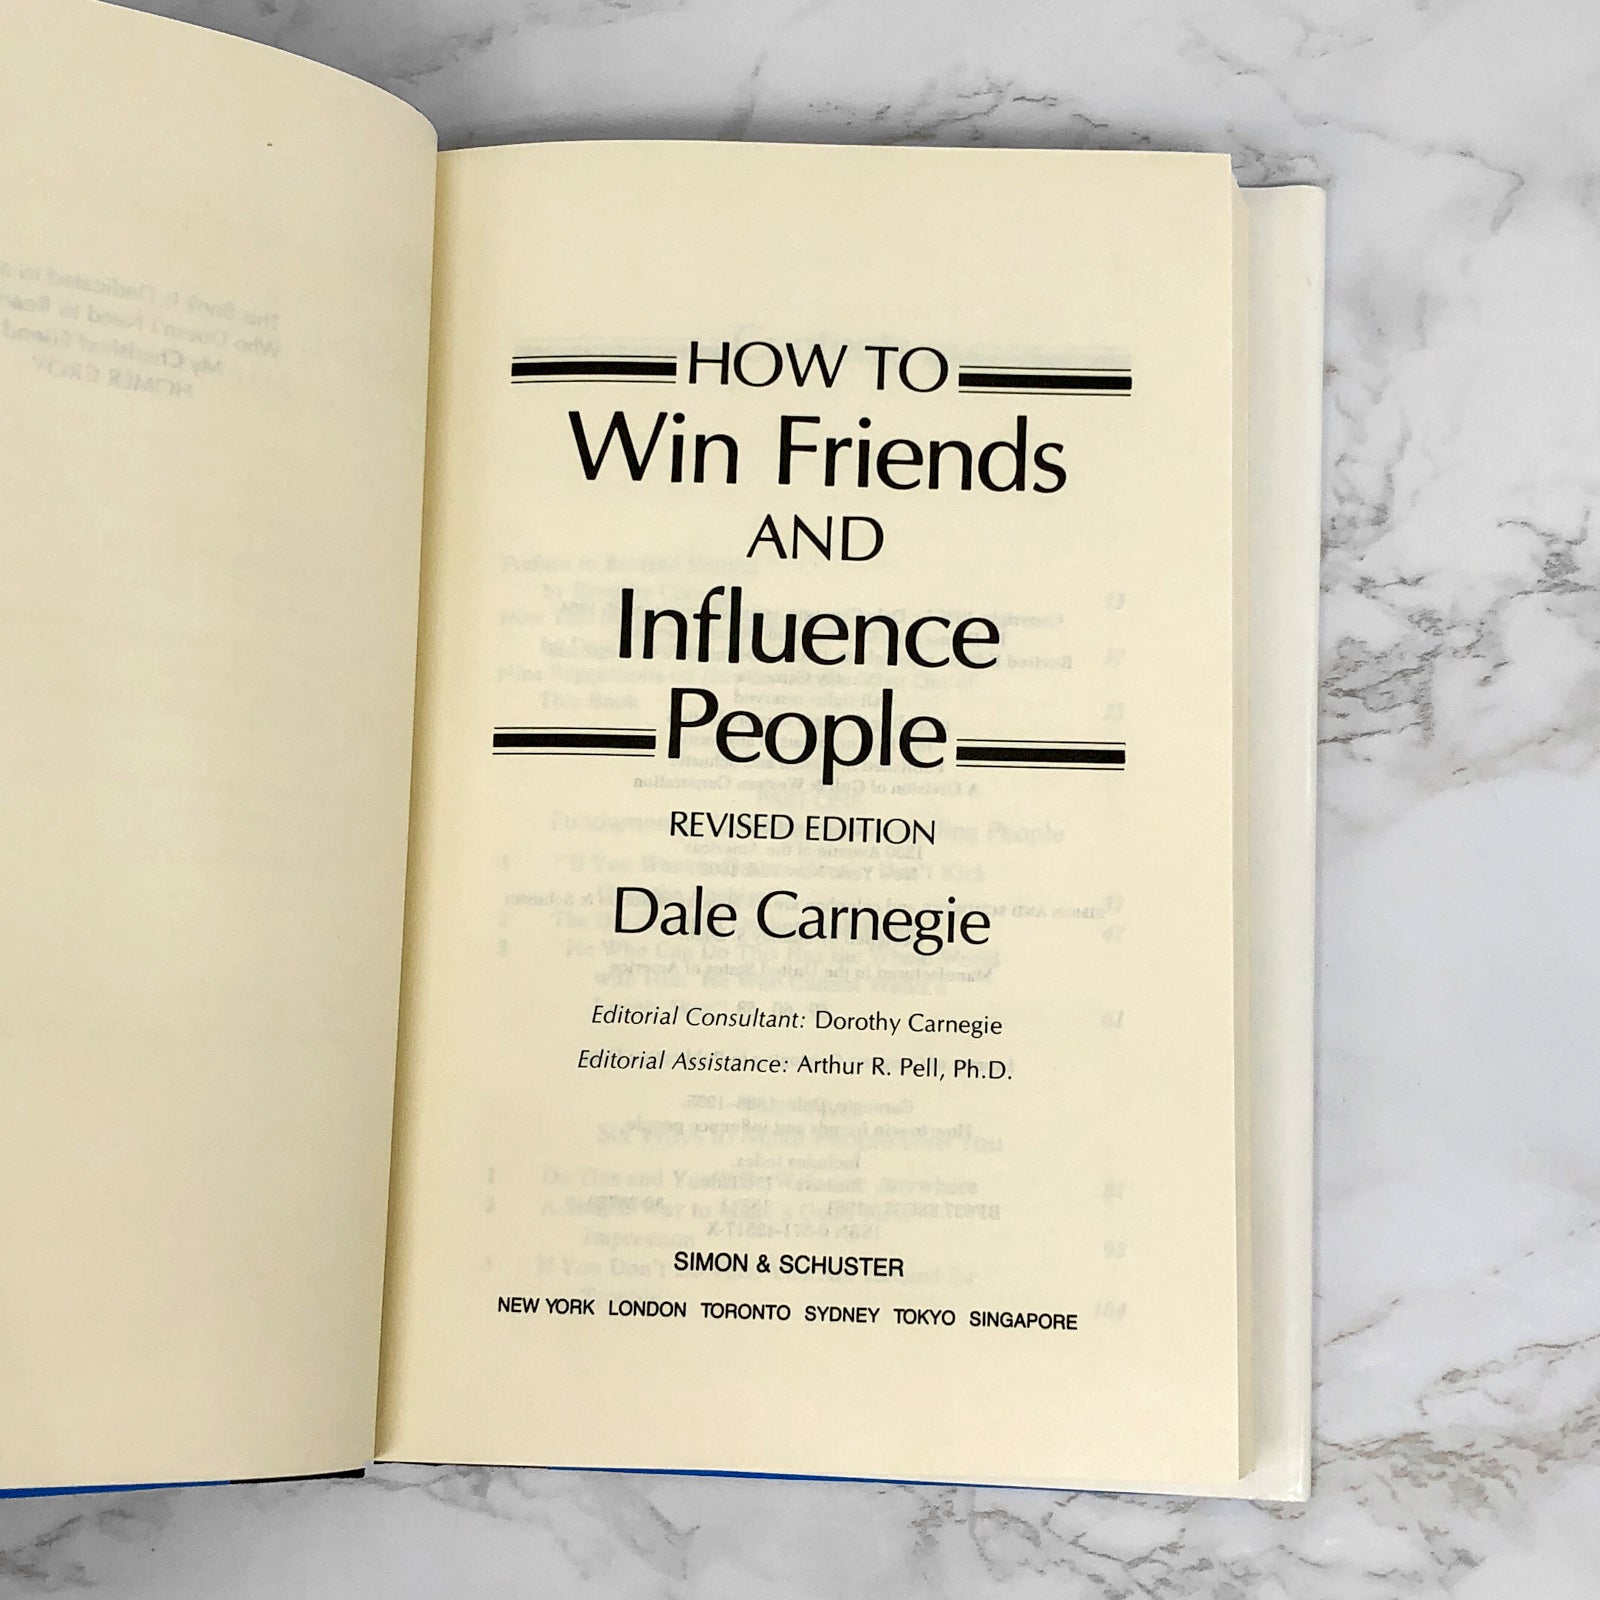 How To Win Friends and Influence People by Dale Carnegie [REVISED HARD